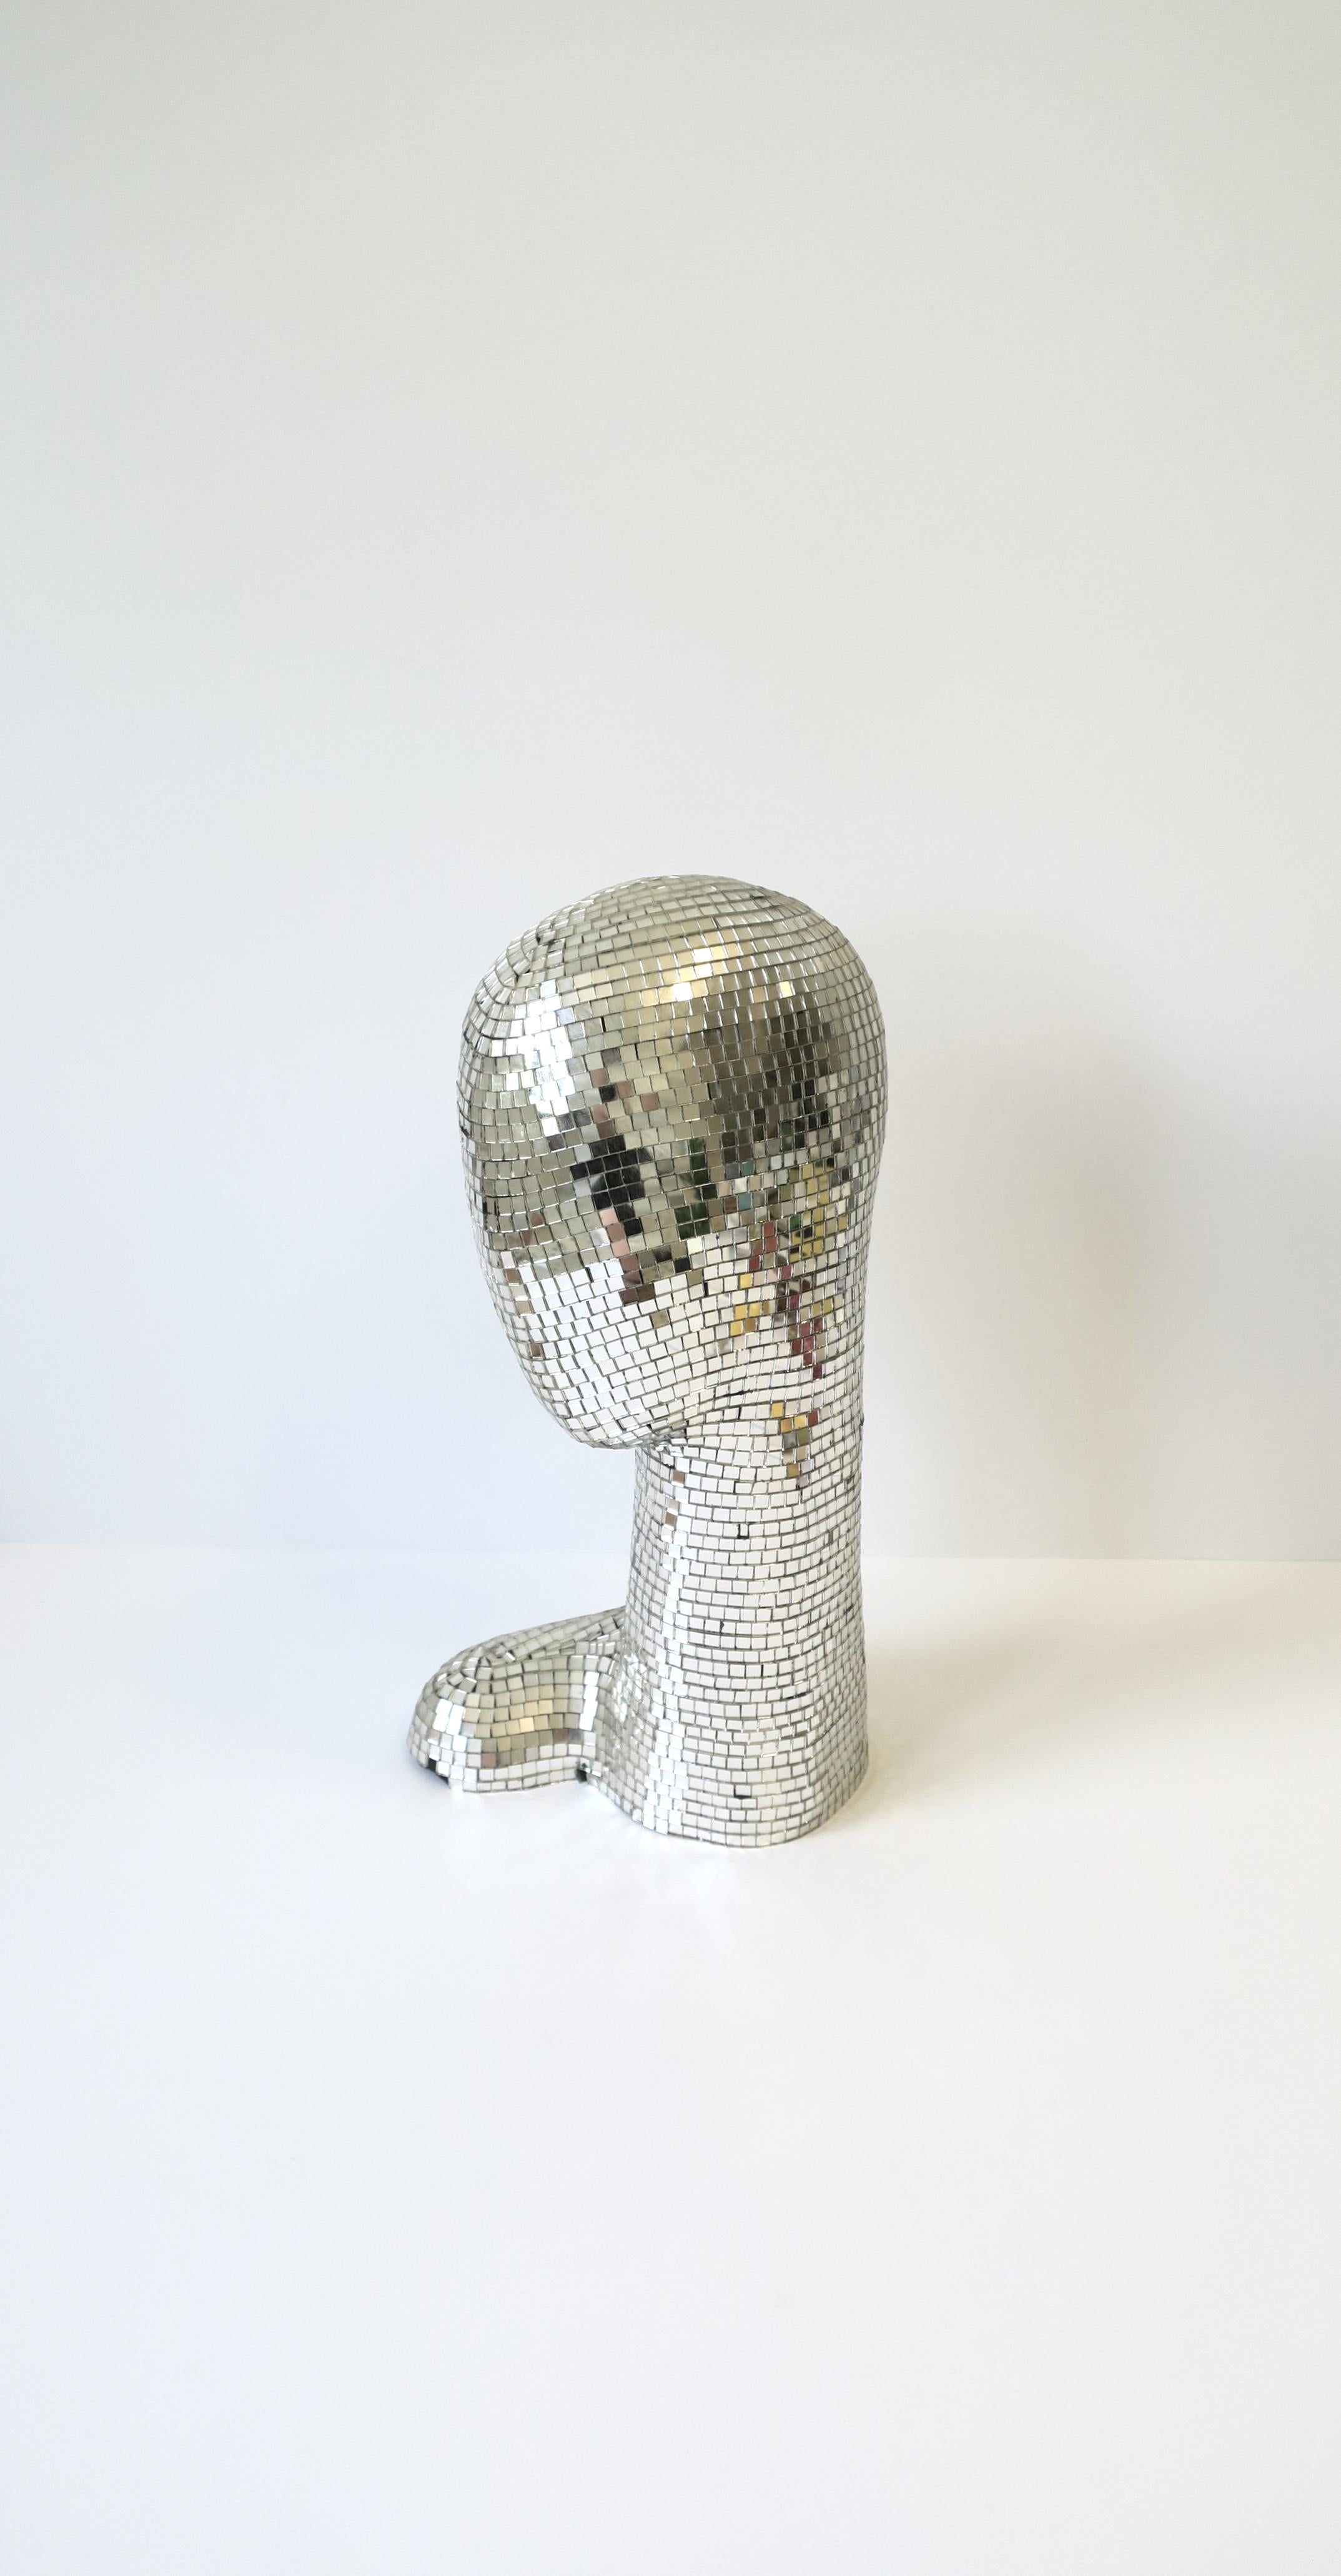 A disco head bust, circa 1970s, New York, NY. This female head bust sculpture is hand-crafted with small glass mirror mosaic pieces just like the 'Disco Ball'. A great piece reminiscent of the disco nightclub era. Dimensions: 8